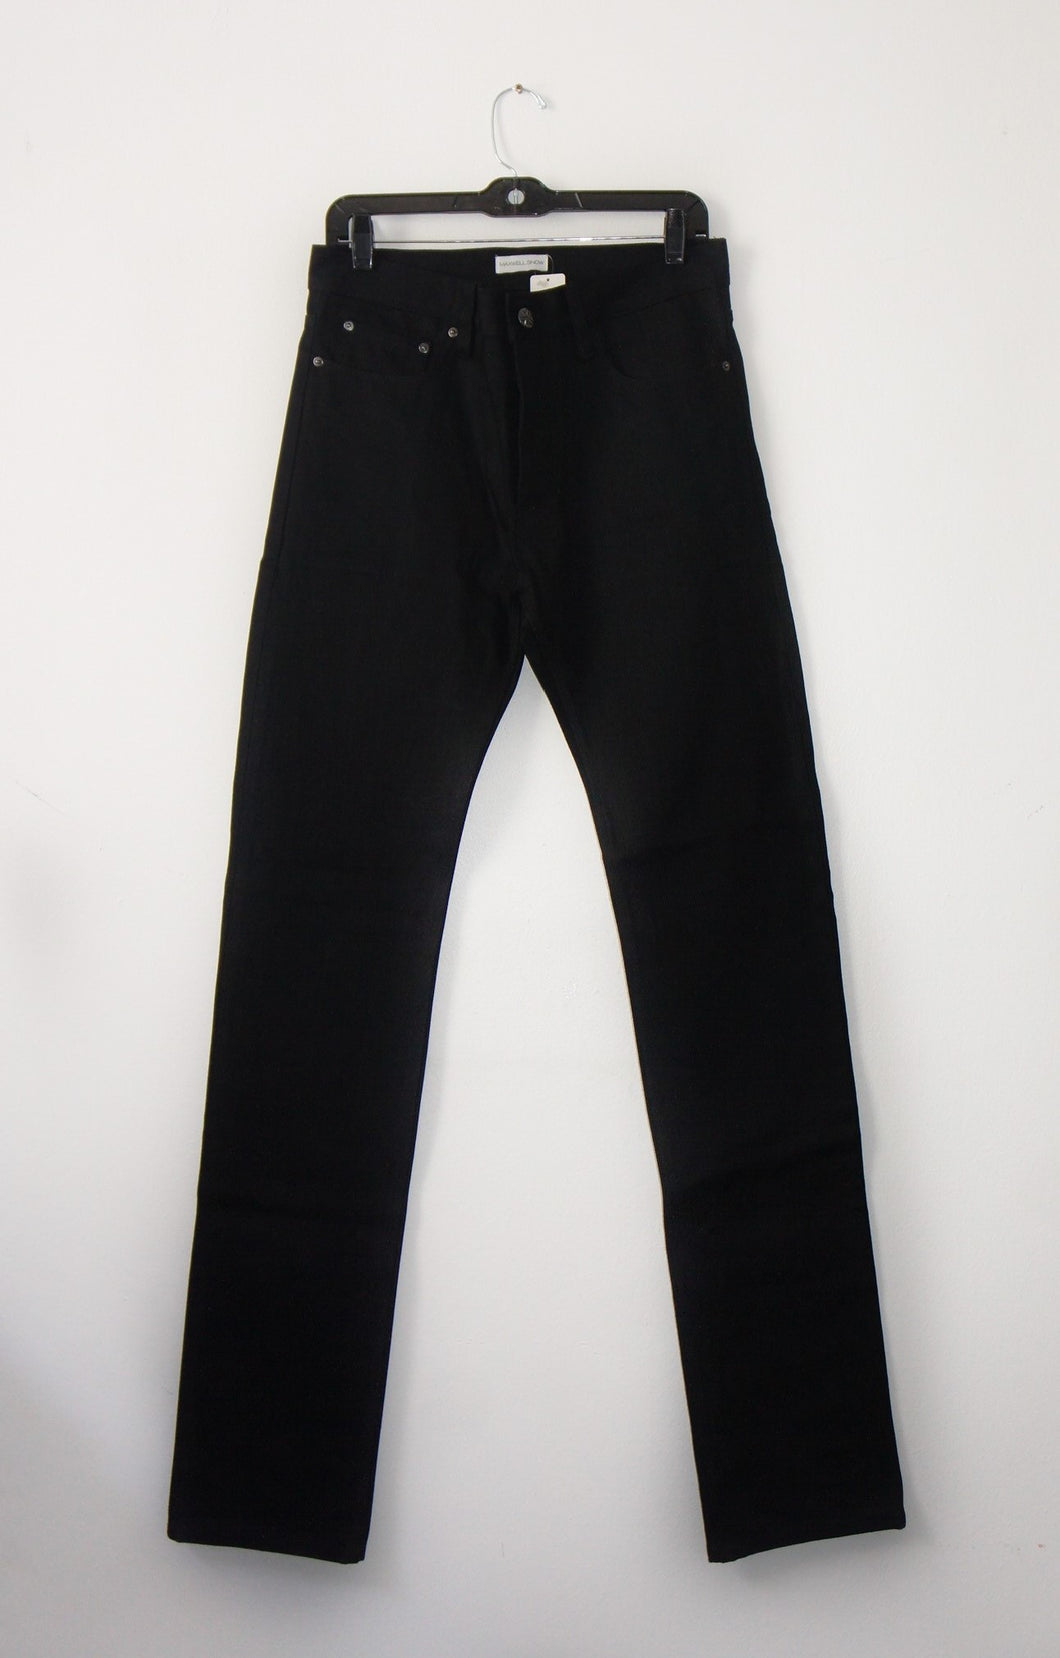 Maxwell Snow silver lining men's jeans in black